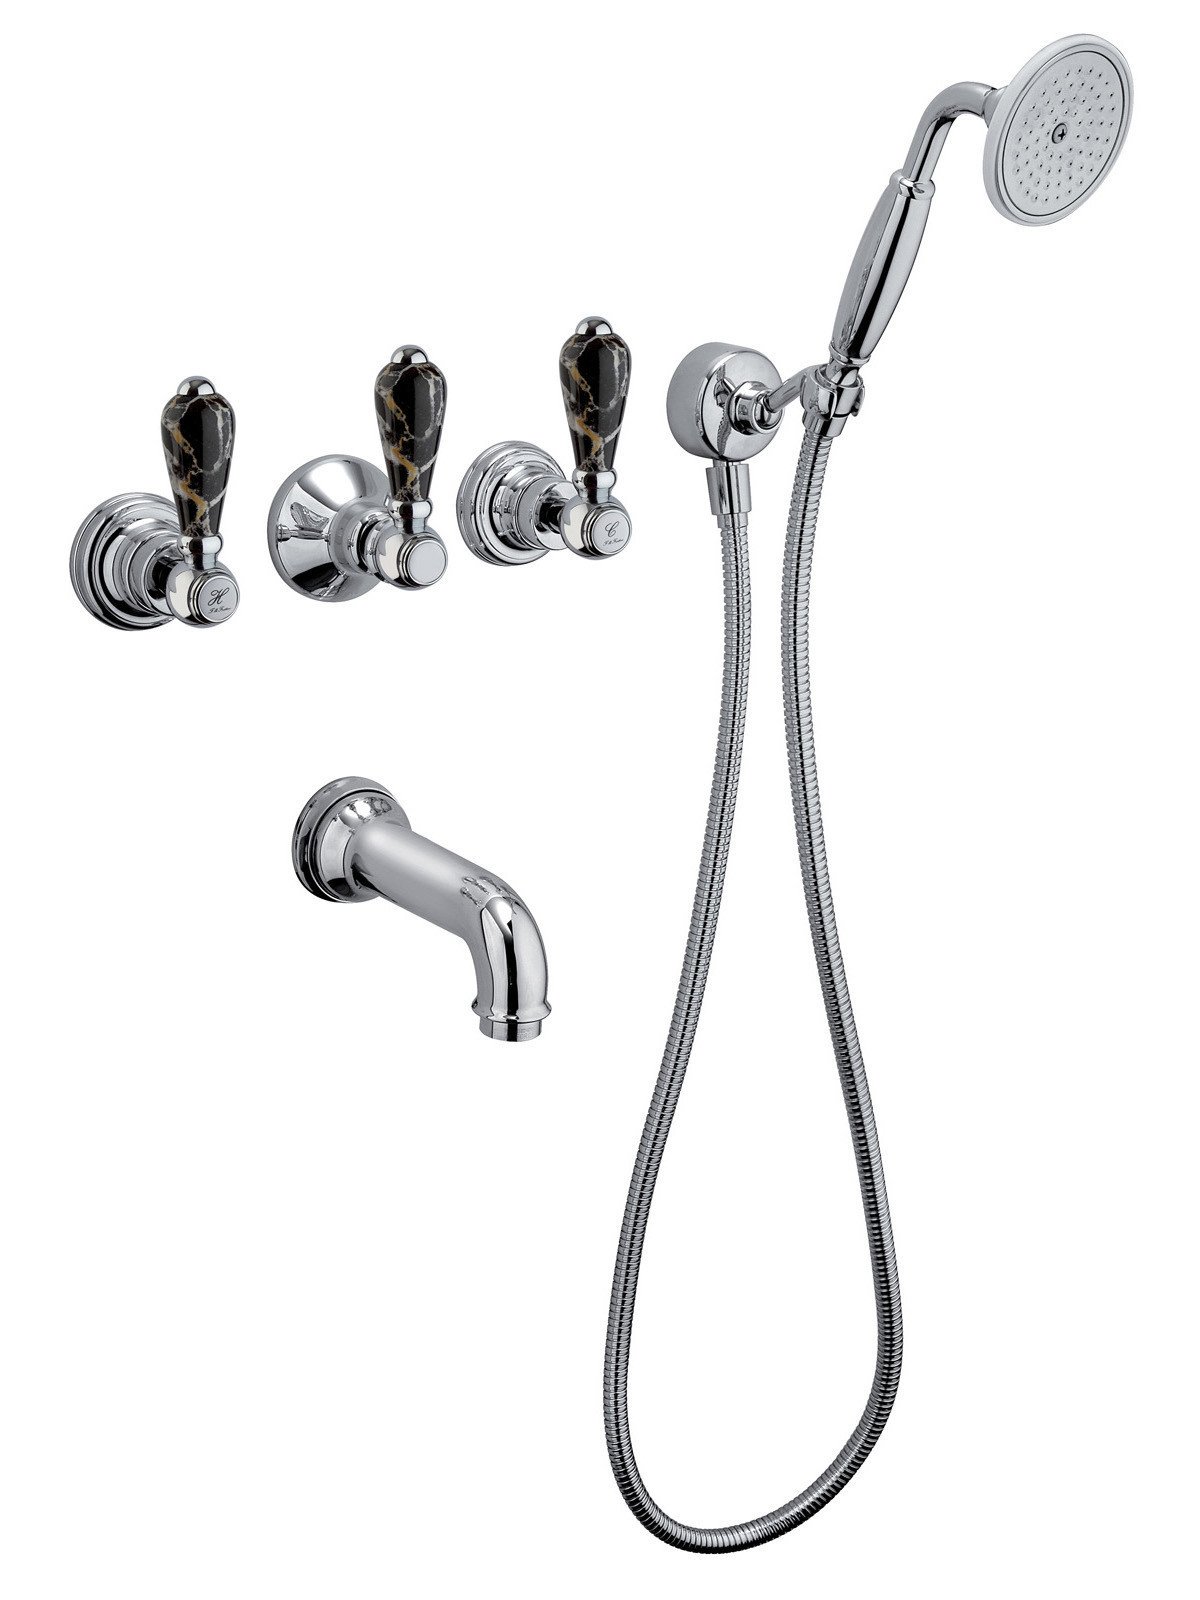 Built-in bath mixer, with central diverter and duplex shower